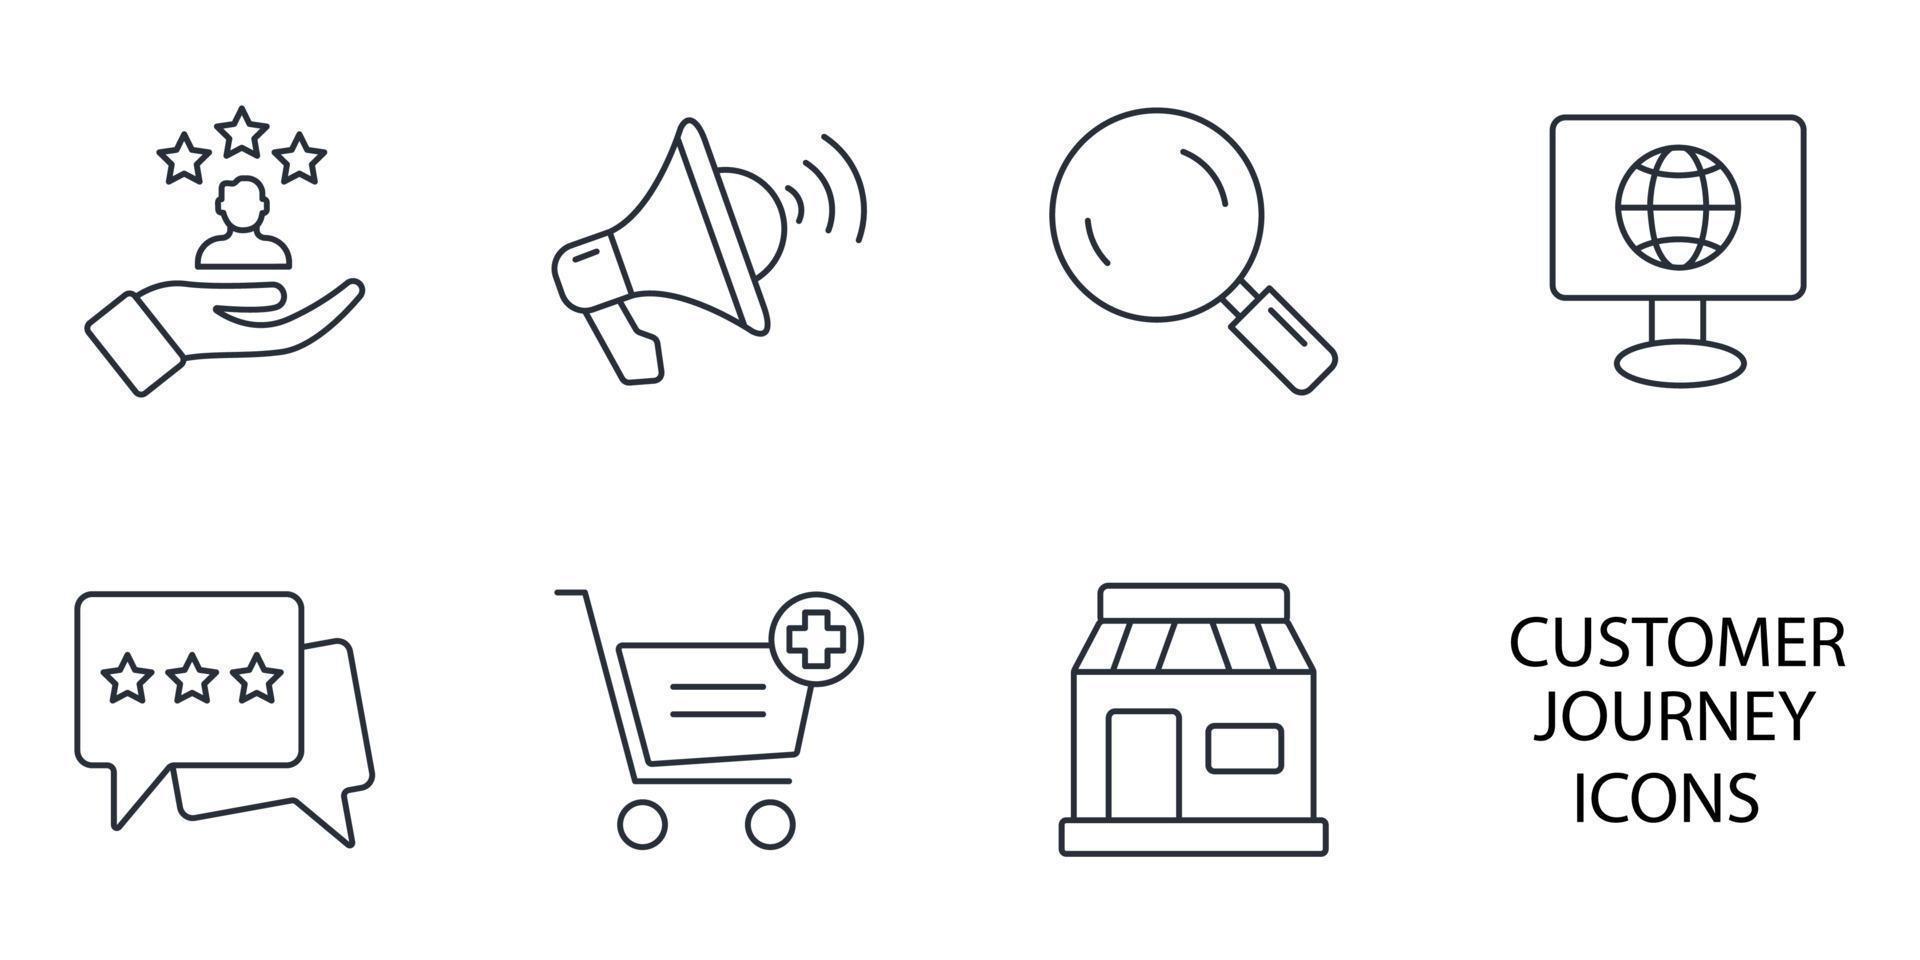 Customer journey icons set . Customer journey pack symbol vector elements for infographic web